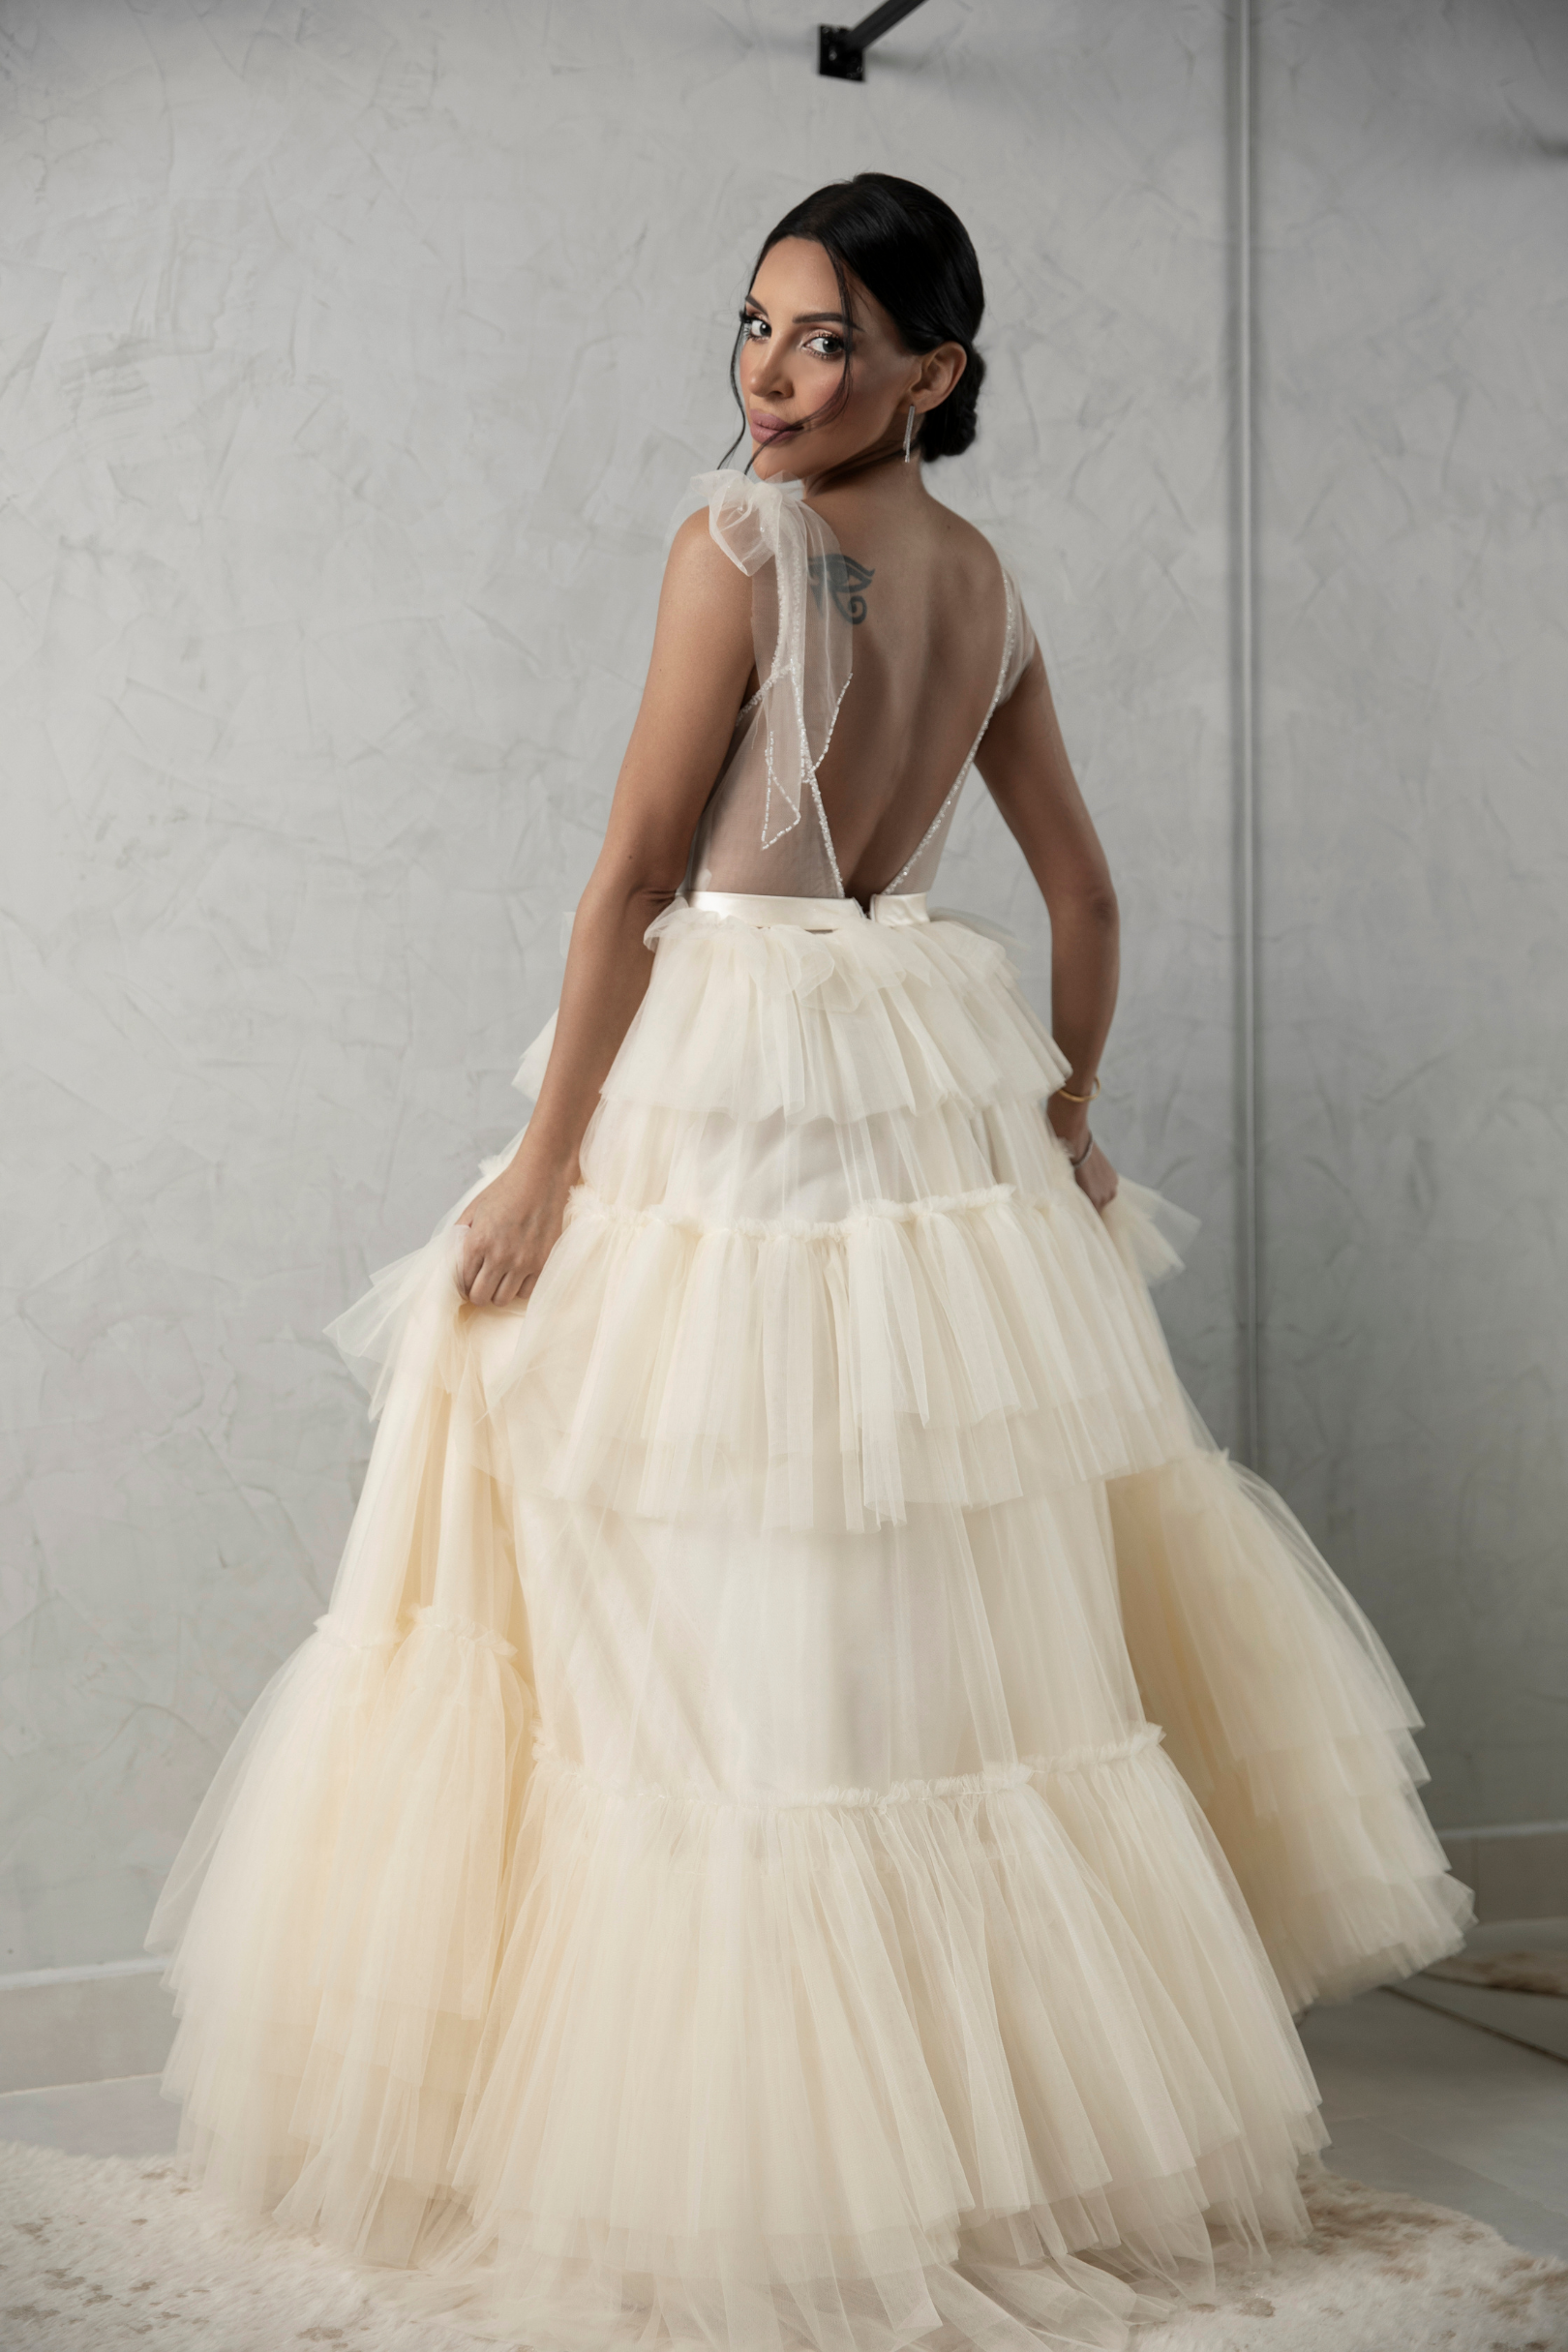 Elegant white evening dress with a creative design made of tulle and shiny satin